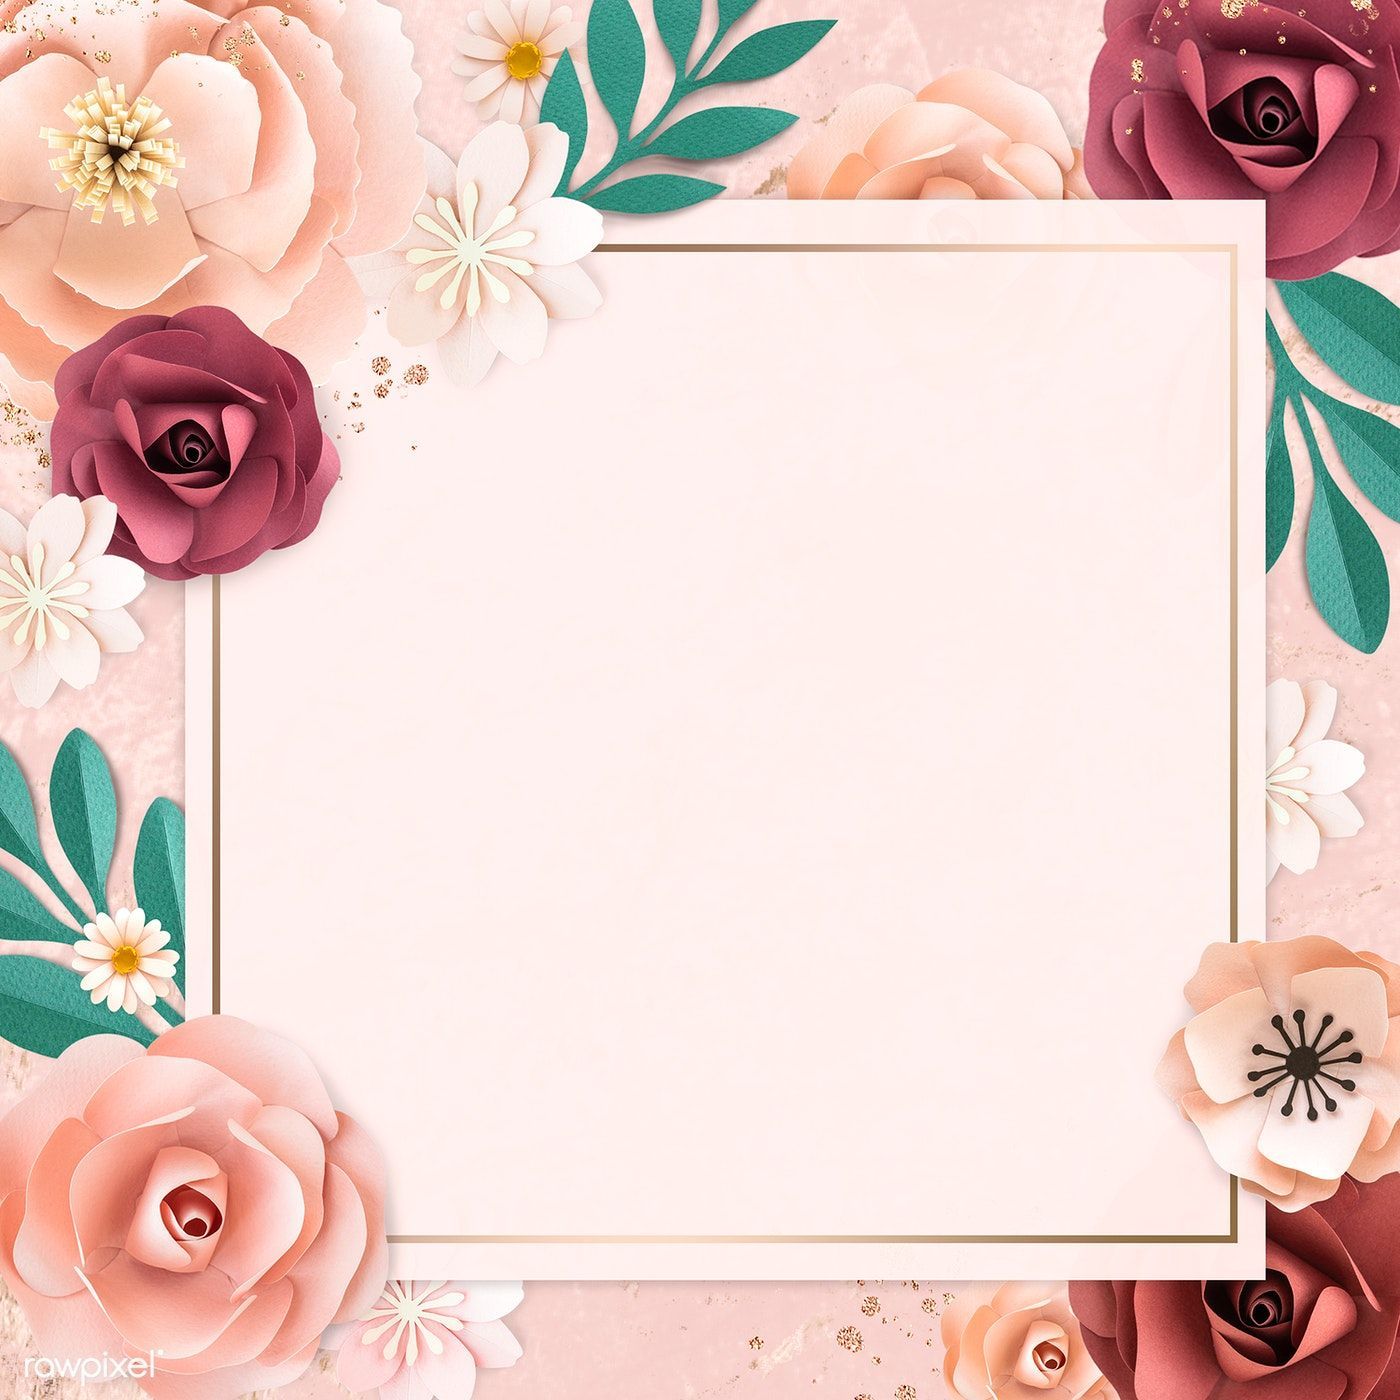 Floral Frame Wallpapers - Wallpaper Cave